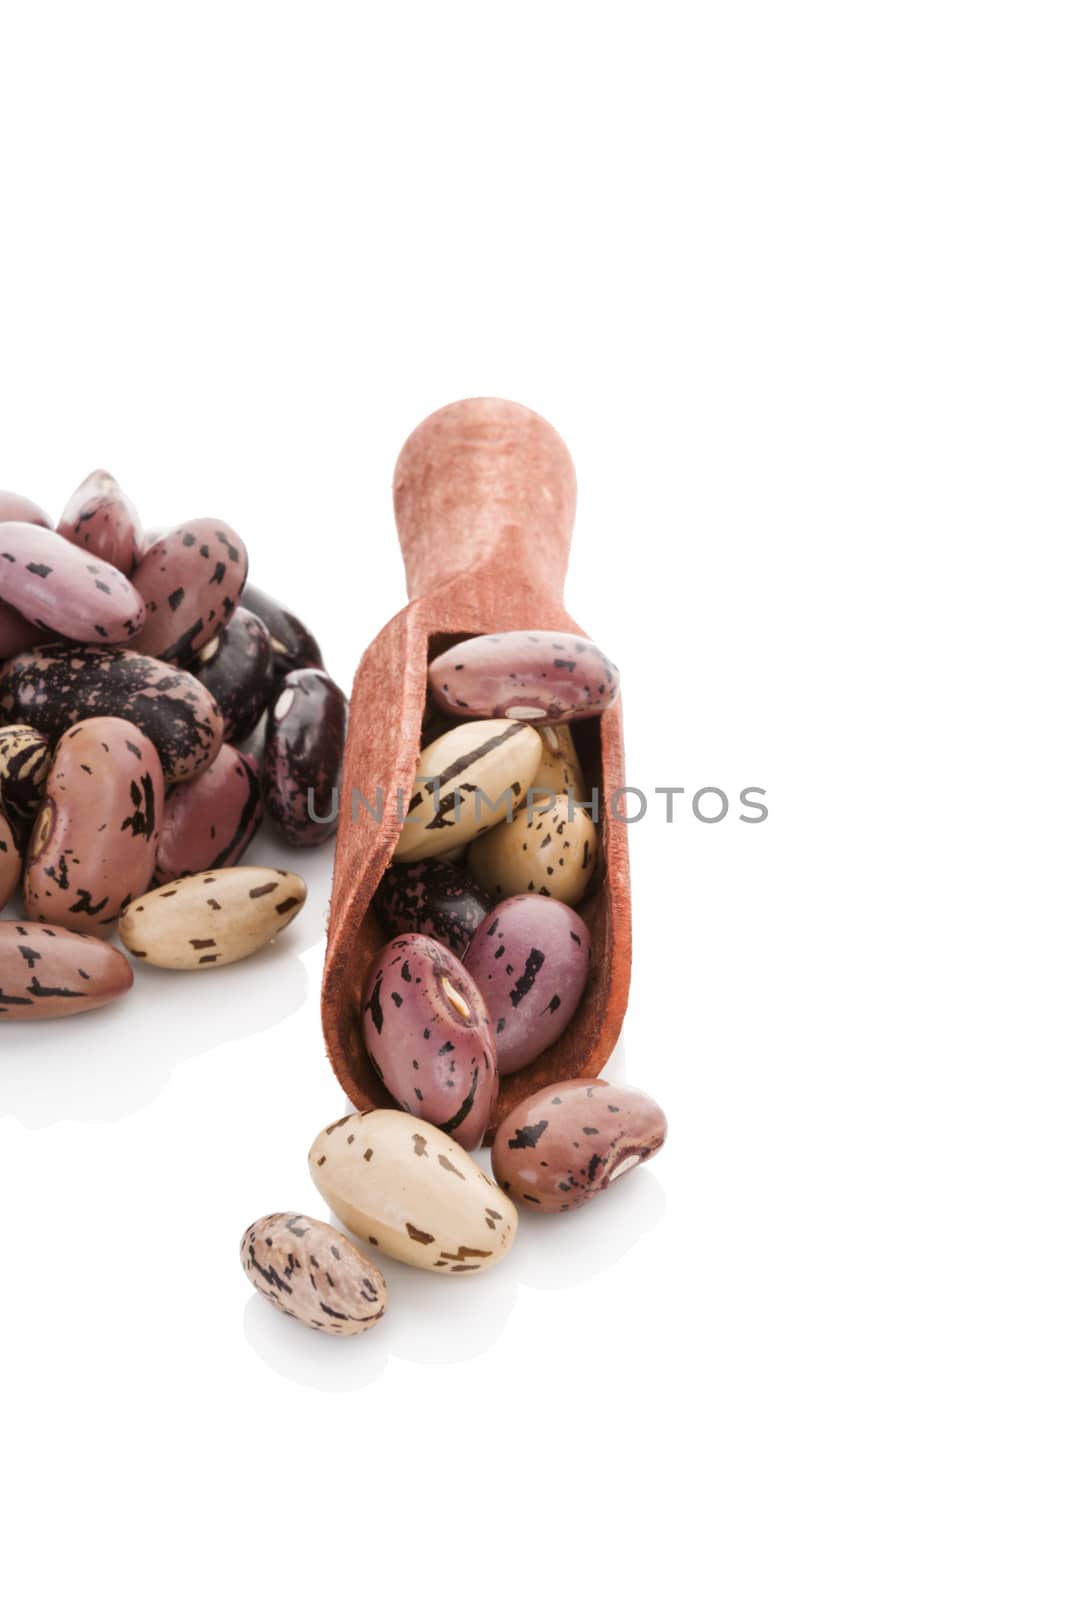 Pinto beans, healthy legumes. by eskymaks